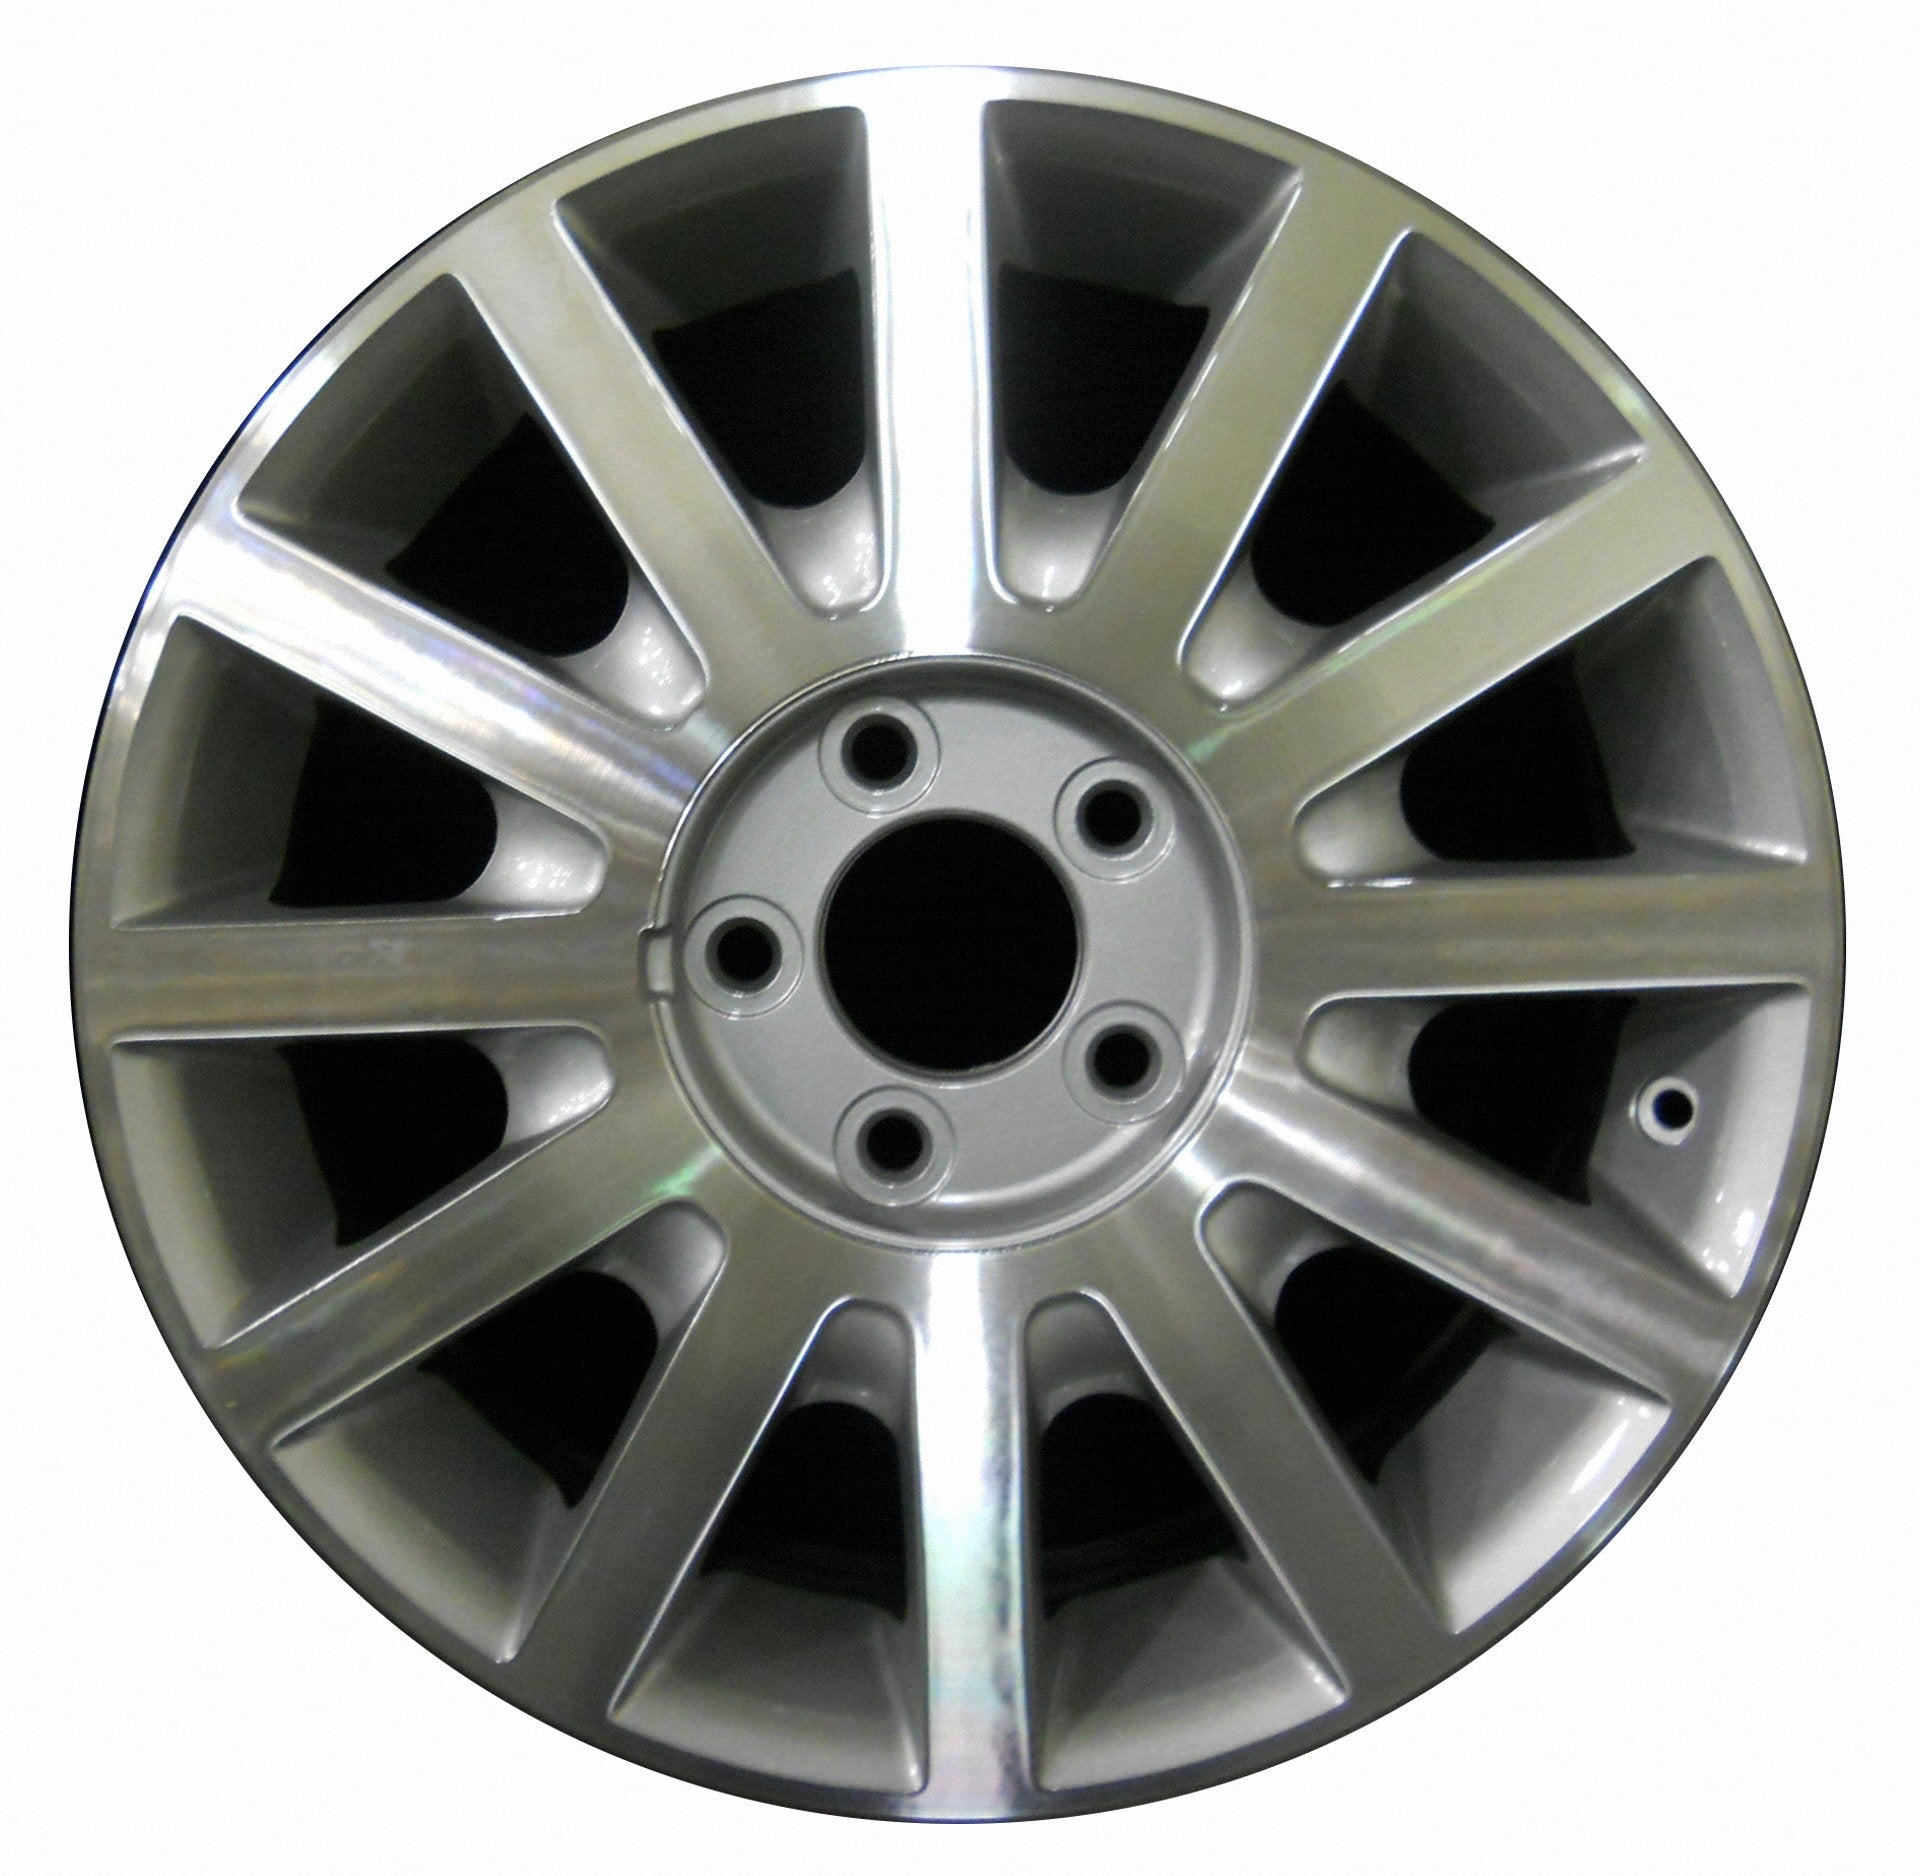 Lincoln Town Car  2005, 2006, 2007, 2008, 2009, 2010, 2011 Factory OEM Car Wheel Size 17x7 Alloy WAO.3636.PS01.MA